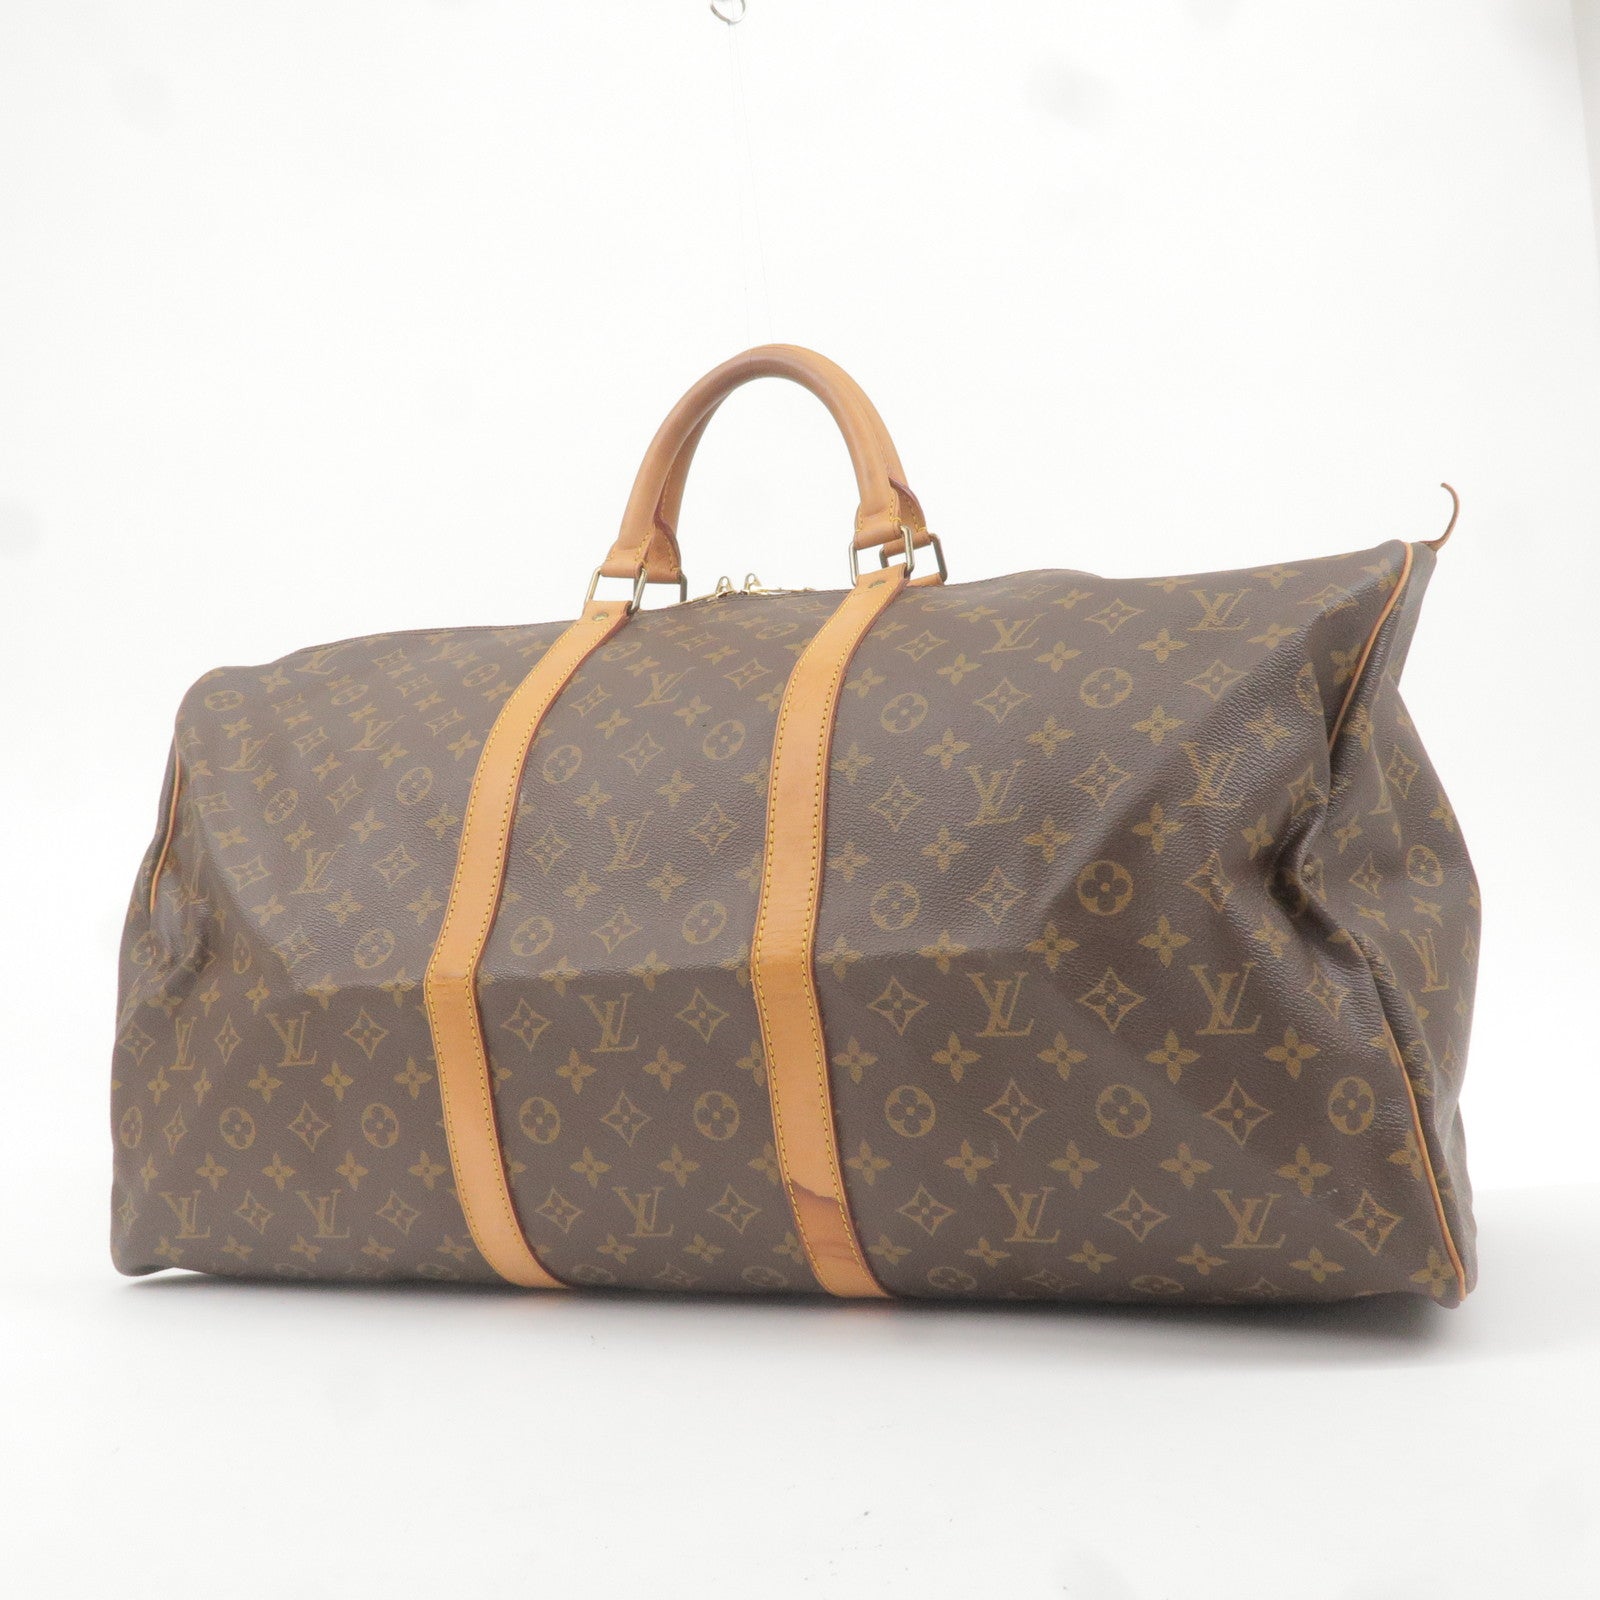 Louis Vuitton 2007 Pre-owned Monogram Holdall Bag - Brown